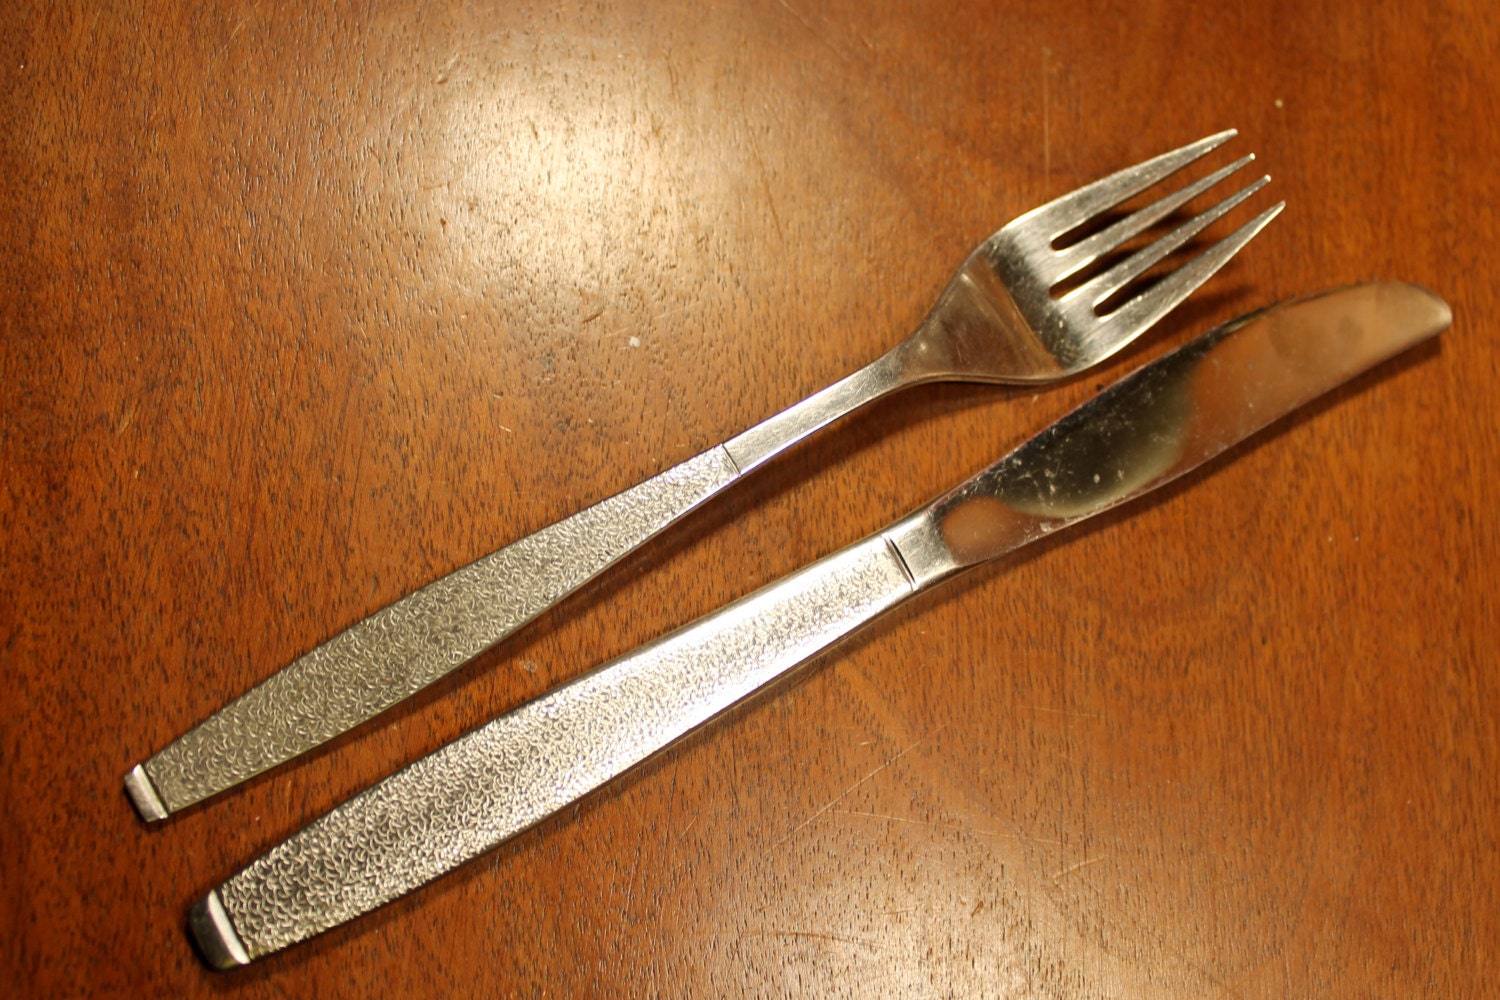 Vintage Flatware by National Stainless in Caress by AtomicHoliday